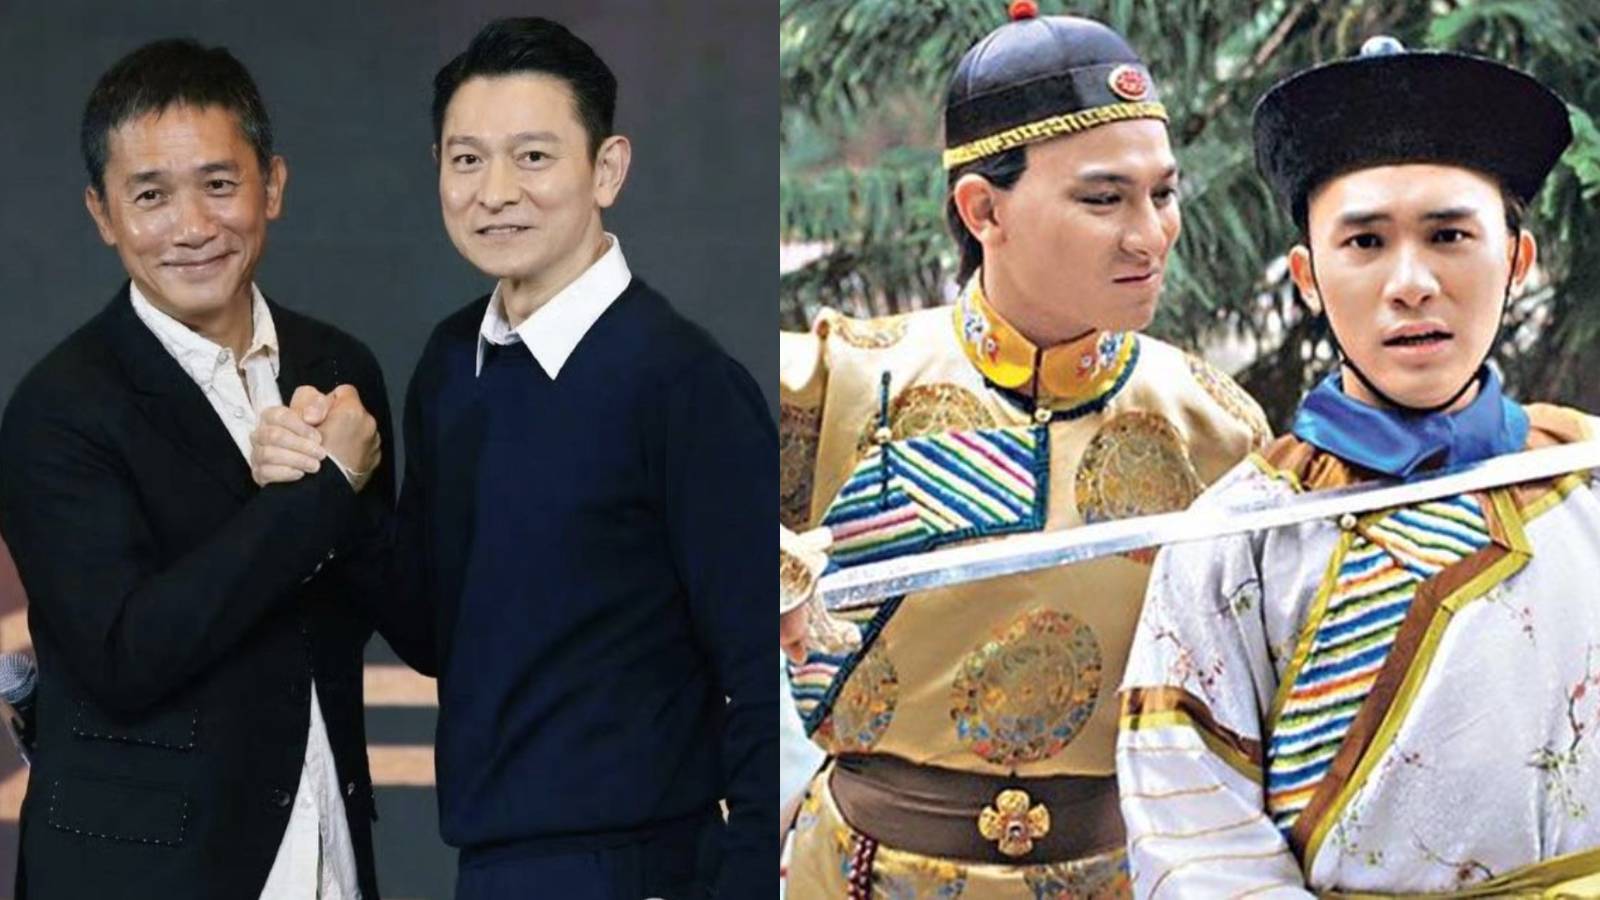 “We Haven’t Changed Much”: Andy Lau & Tony Leung’s 40-Year Bromance Is ...